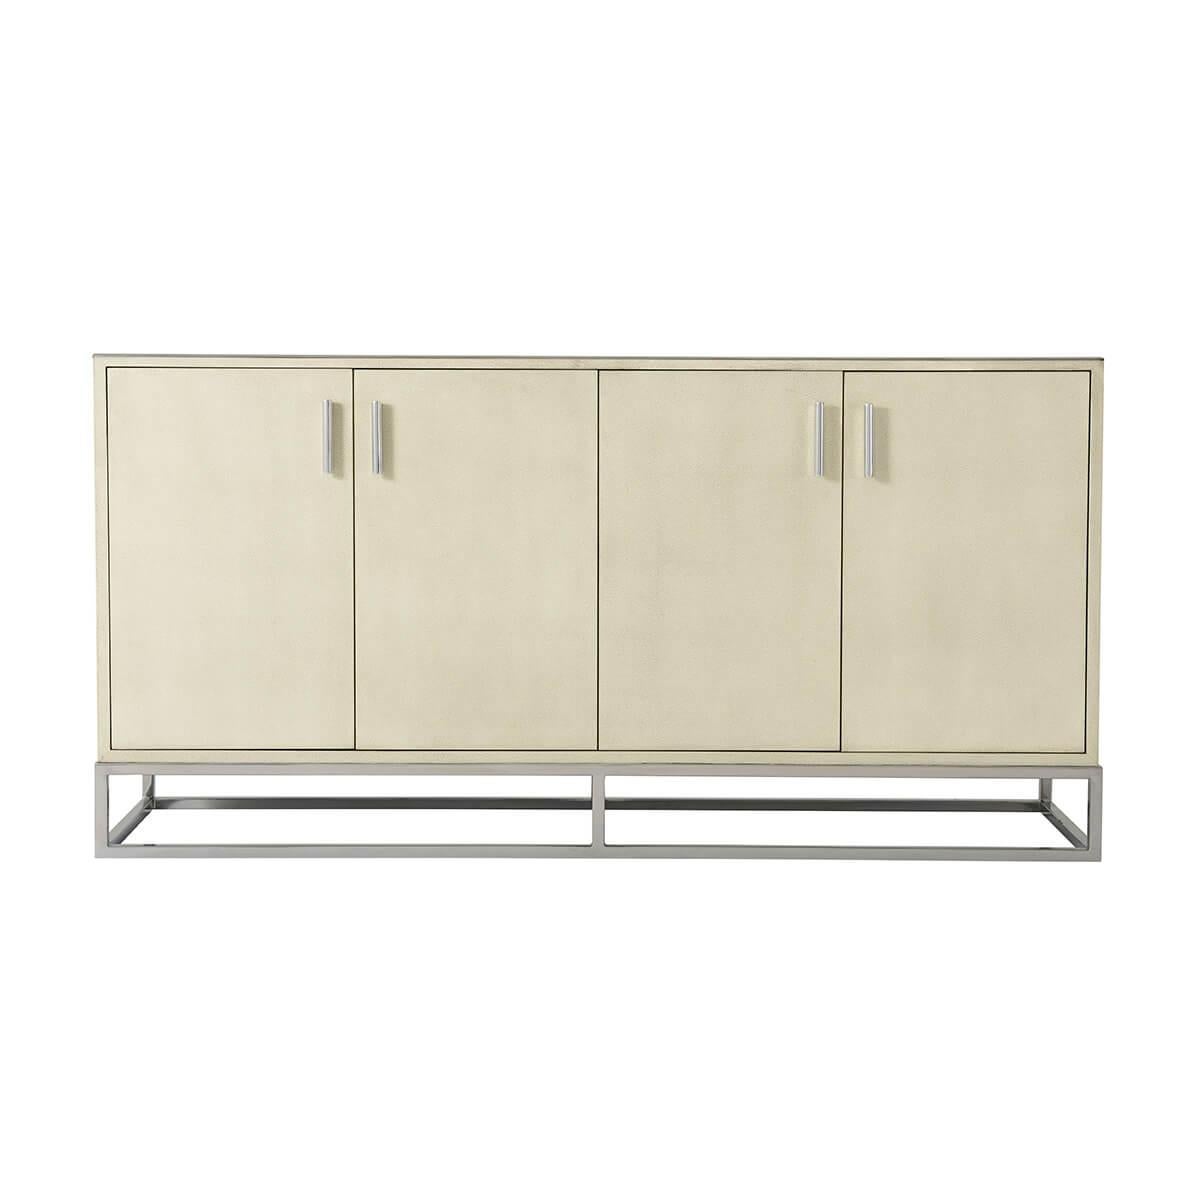 A leather wrapped case, in our light overcast finish, with four doors, enclosing interior shelves. Having nickel-finished hardware and an open cubed base frame.

Dimensions: 63